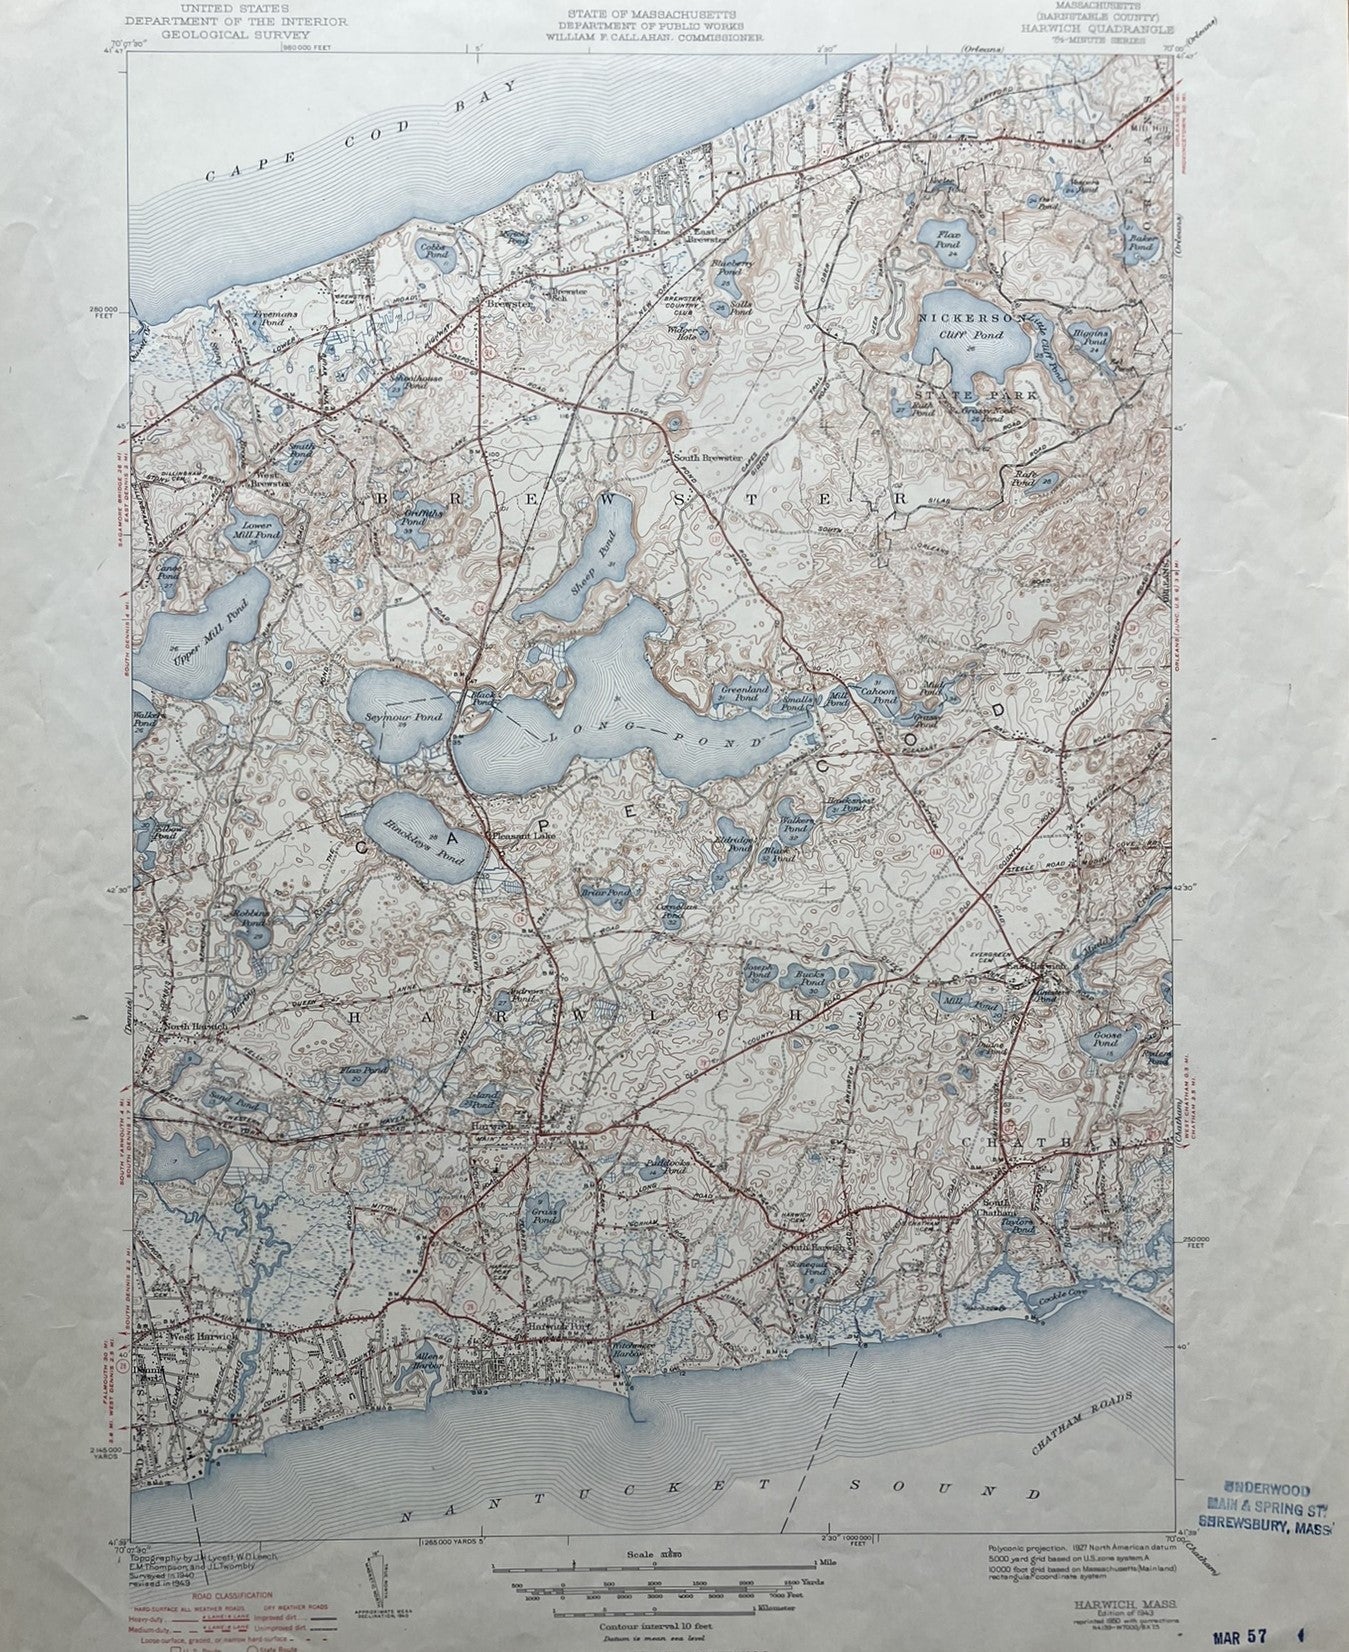 Genuine-Vintage-Map-Harwich-Mass-Cape-Cod-Antique-Topographic-Map-1943-USGS-U-S-Geological-Survey-Maps-Of-Antiquity